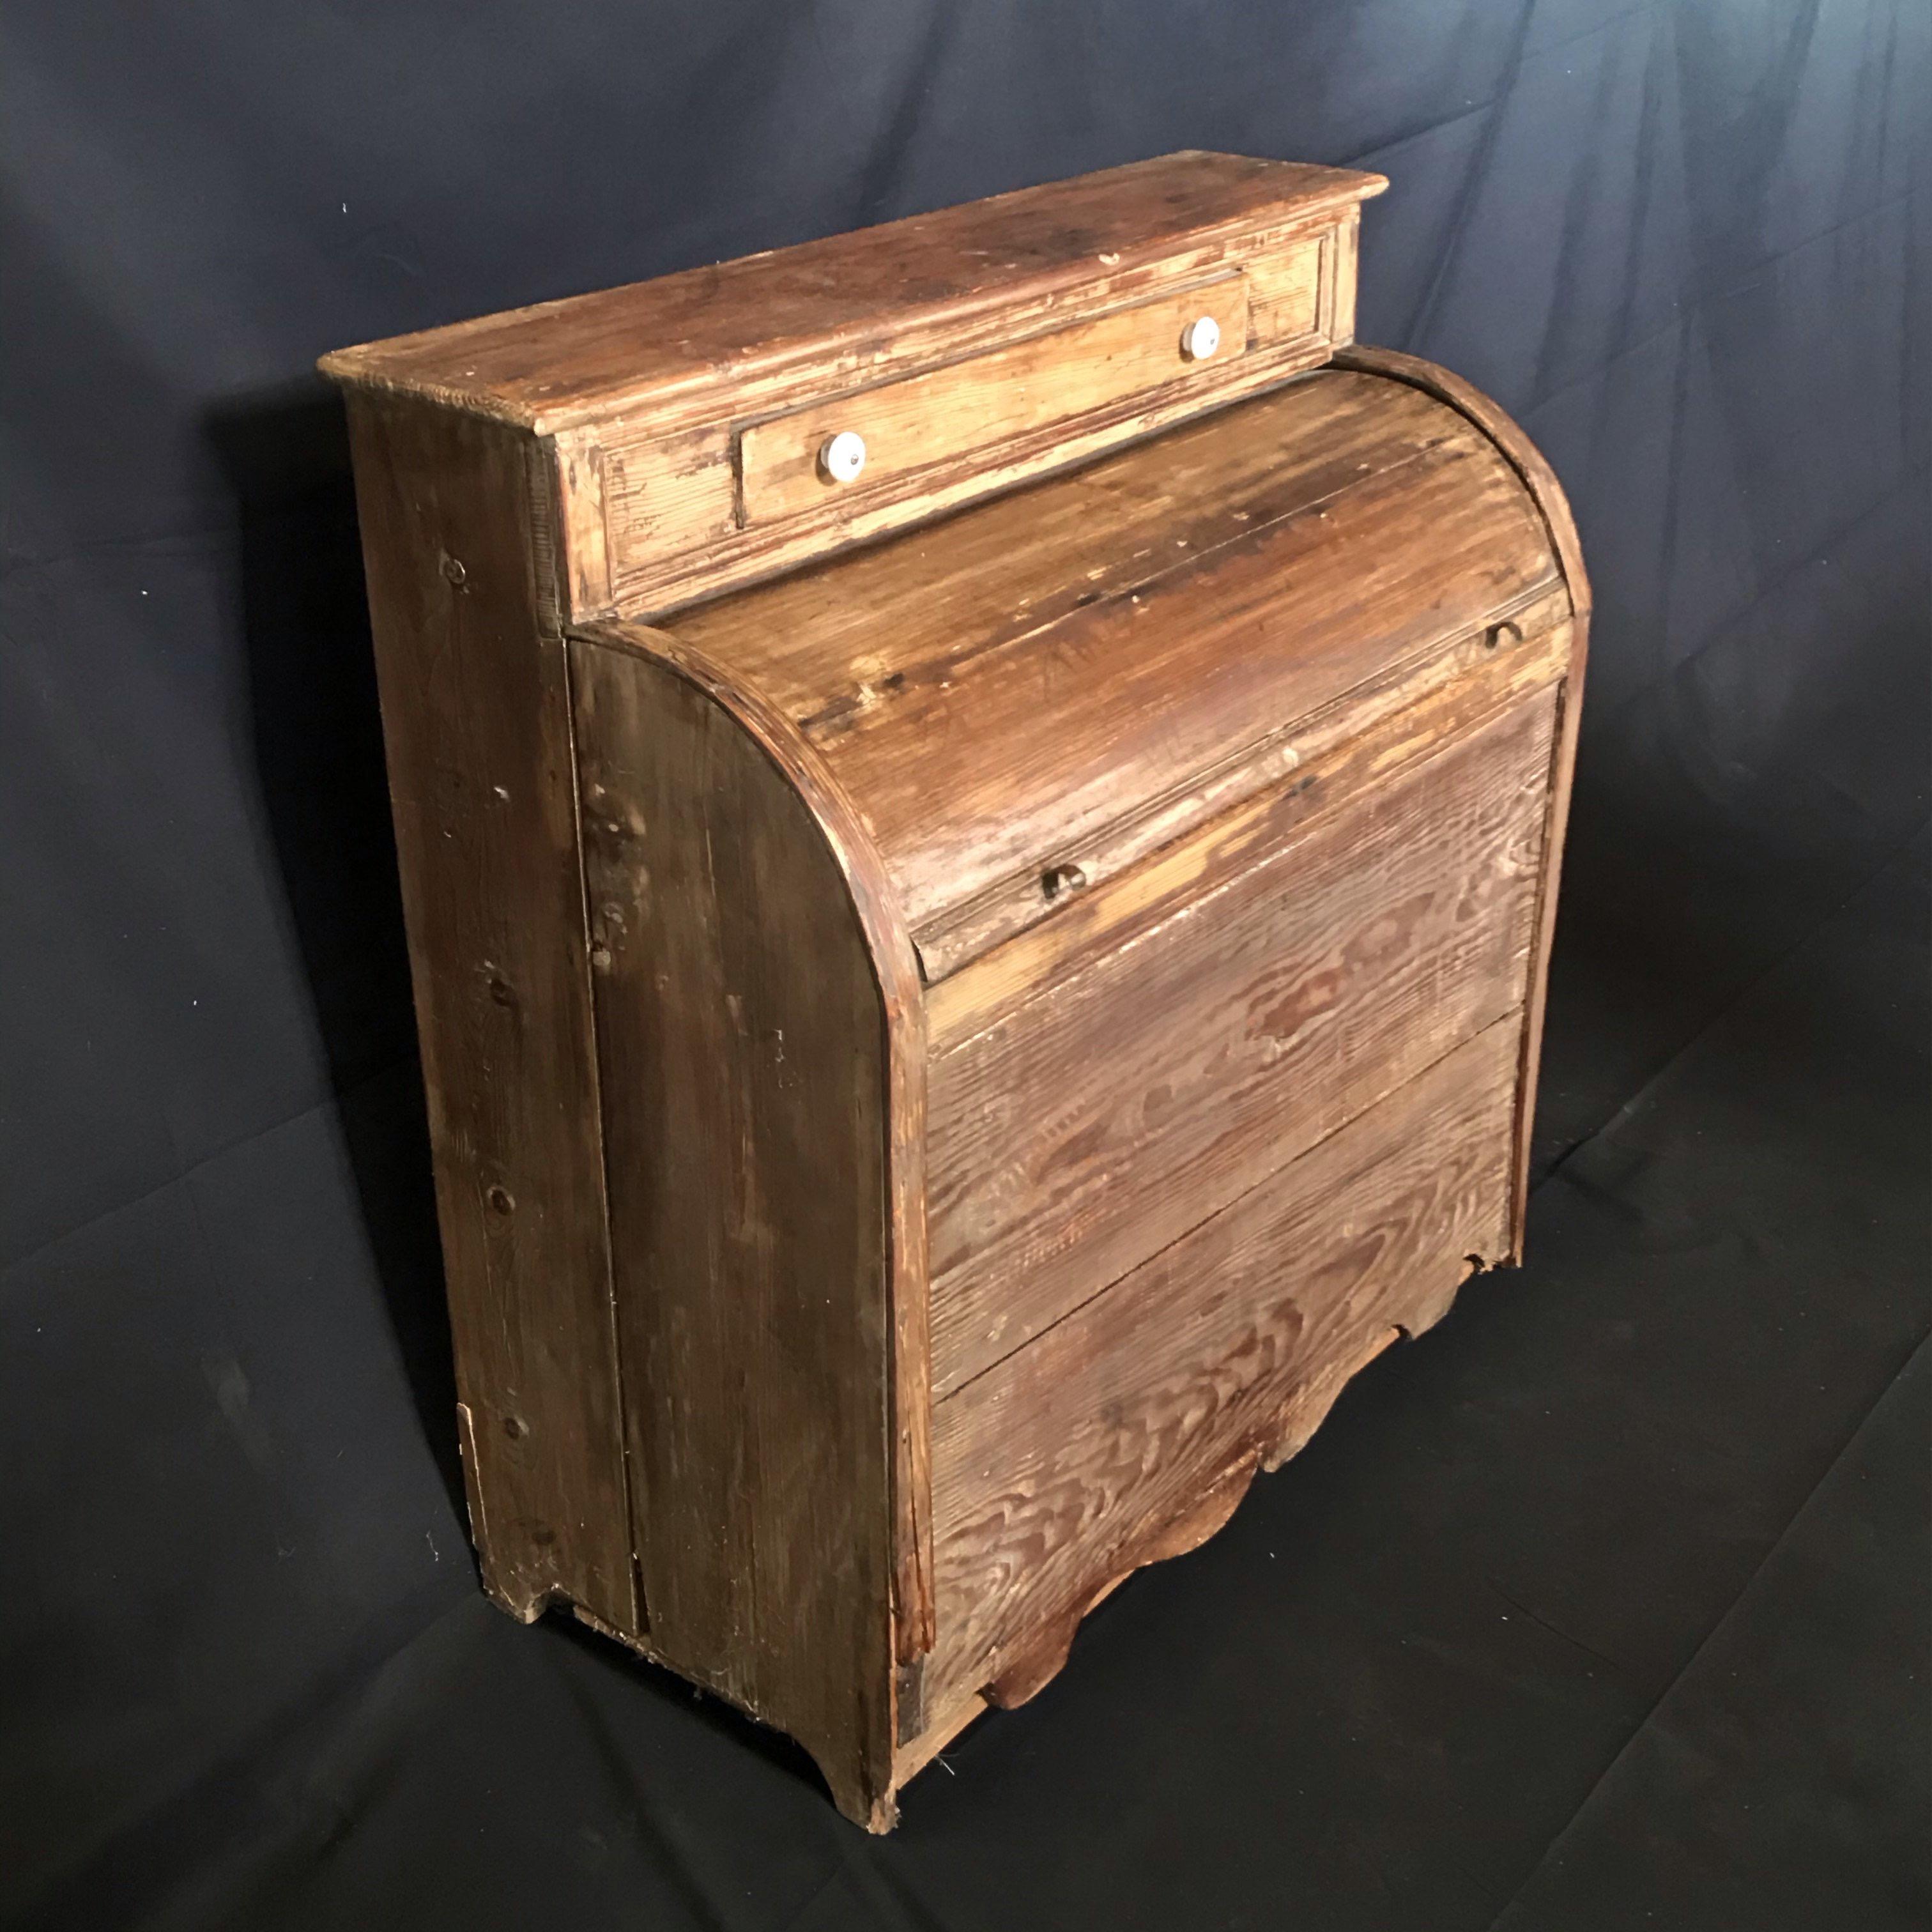 A charming rustic natural pine scalloped edged 19th century wood box or cabinet with match drawer and original interior bright blue paint, great in the corner of your fireplace!
#3485.